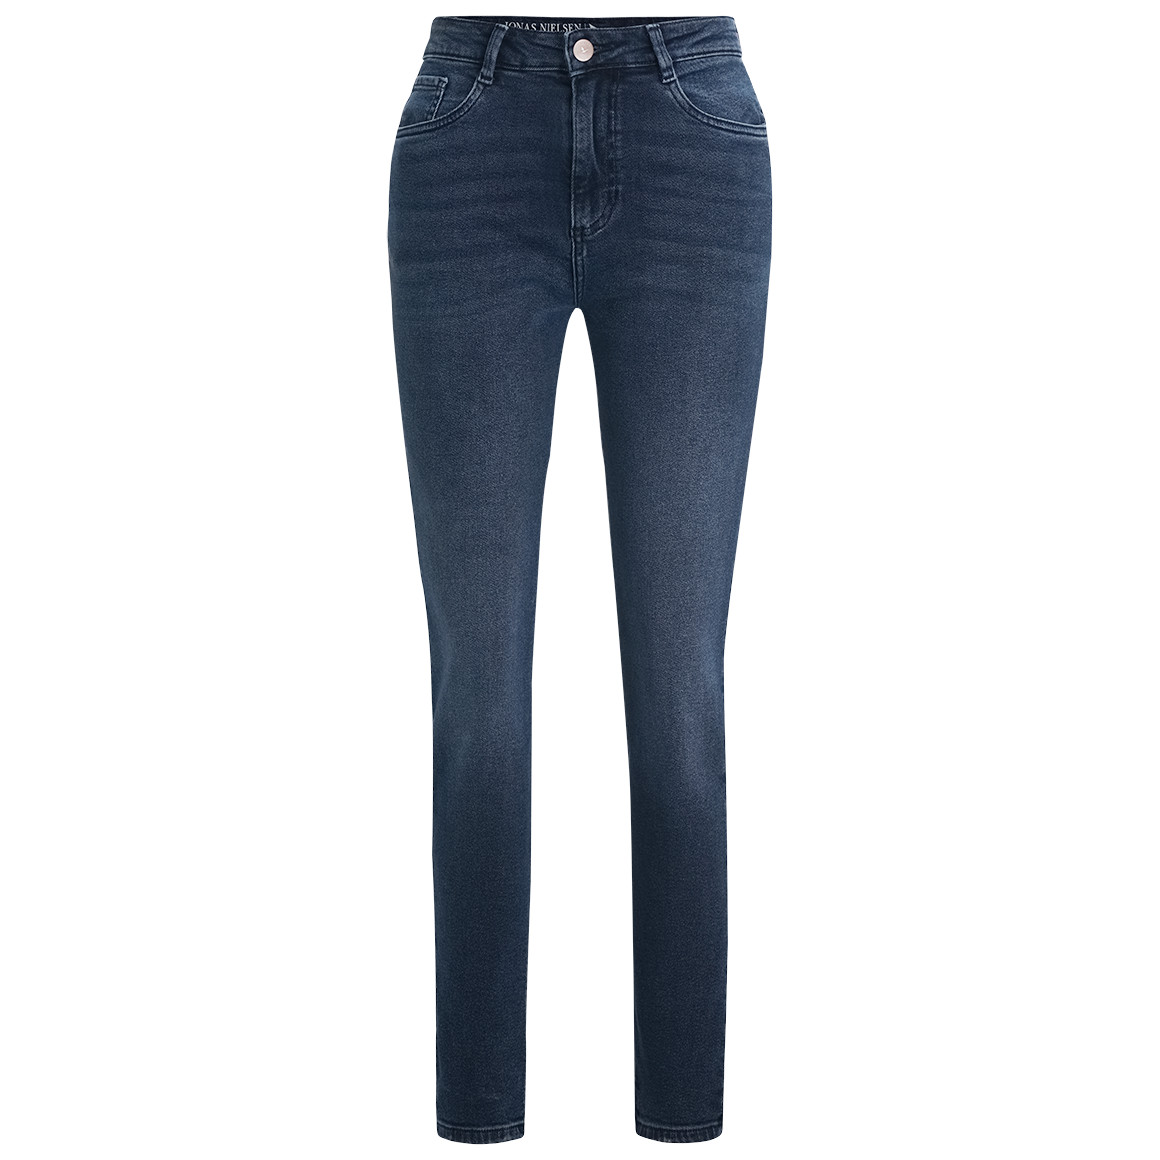 Damen Mom-Jeans mit Used-Waschung | Ernsting's family